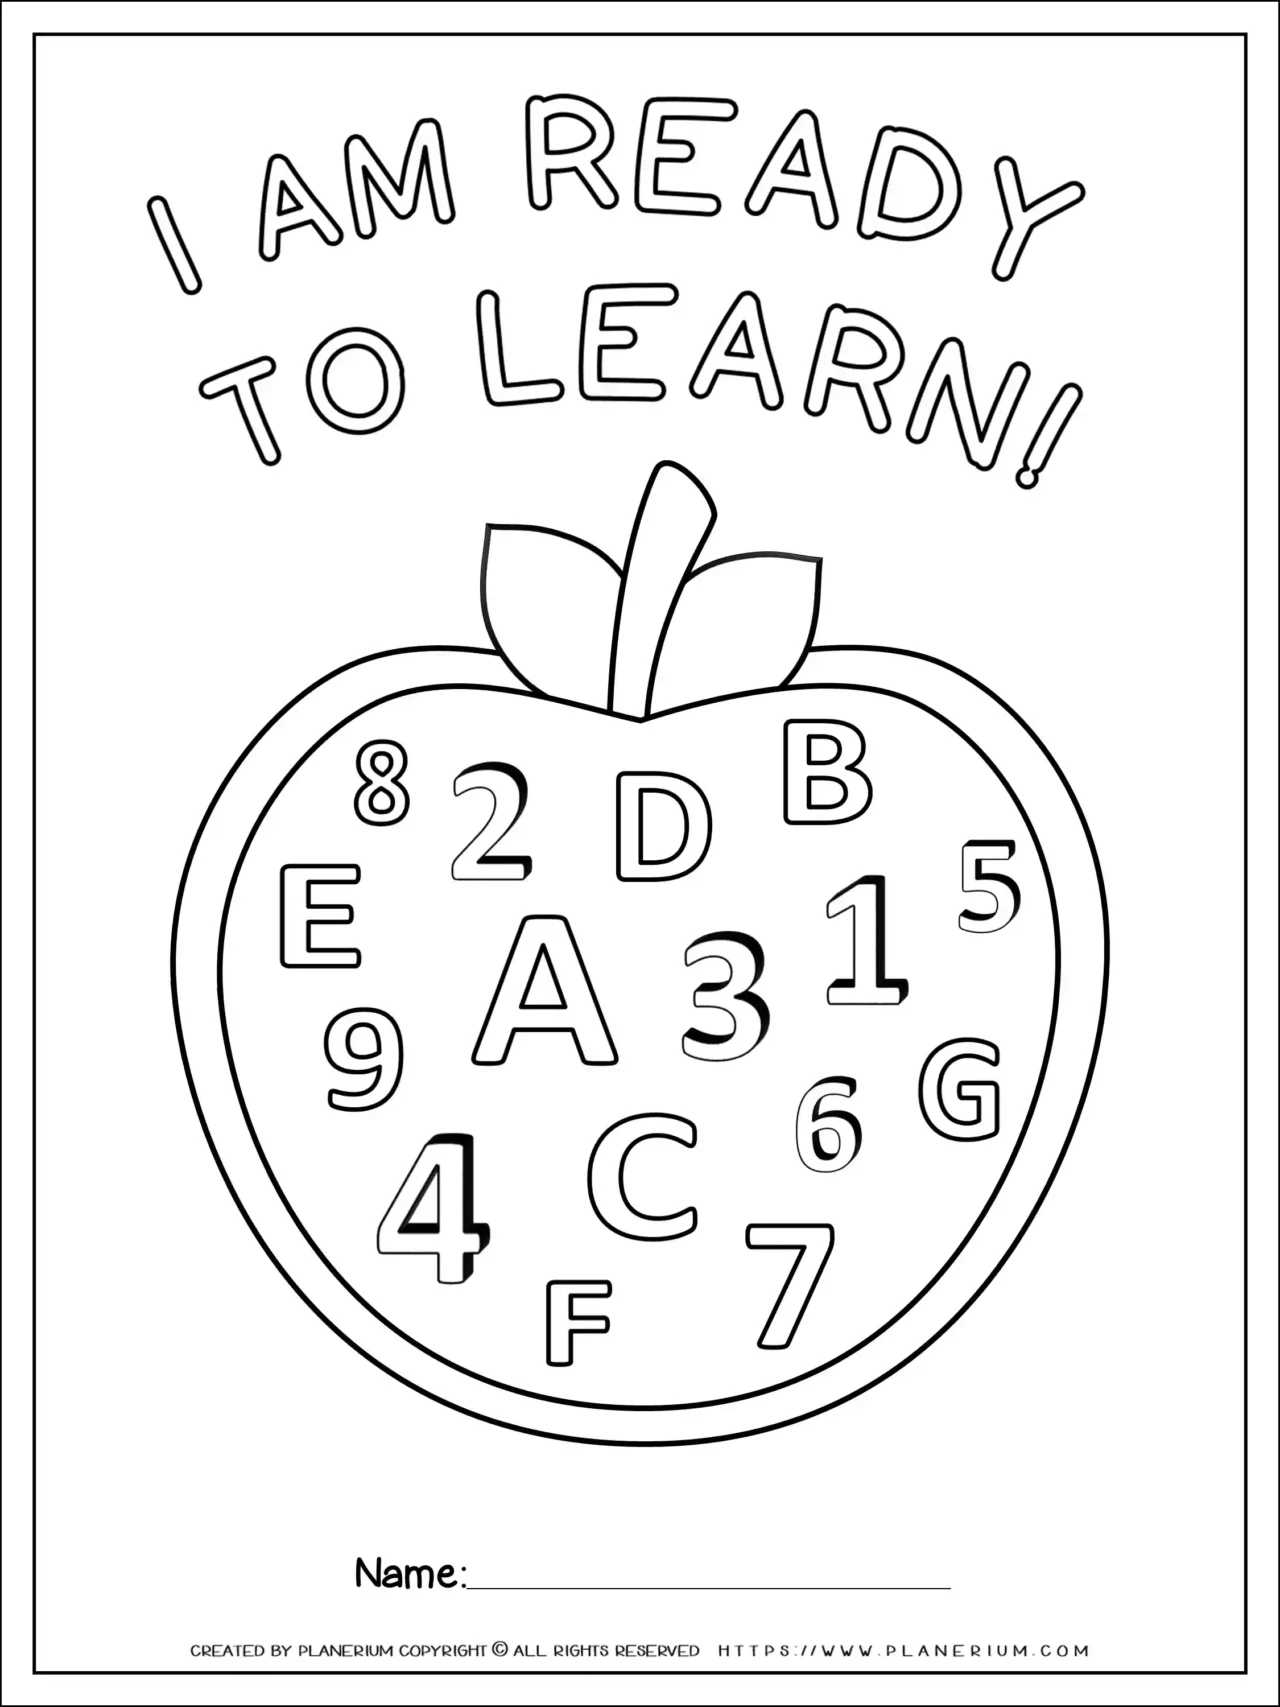 Back to School - Coloring Page - I'm Ready to Learn